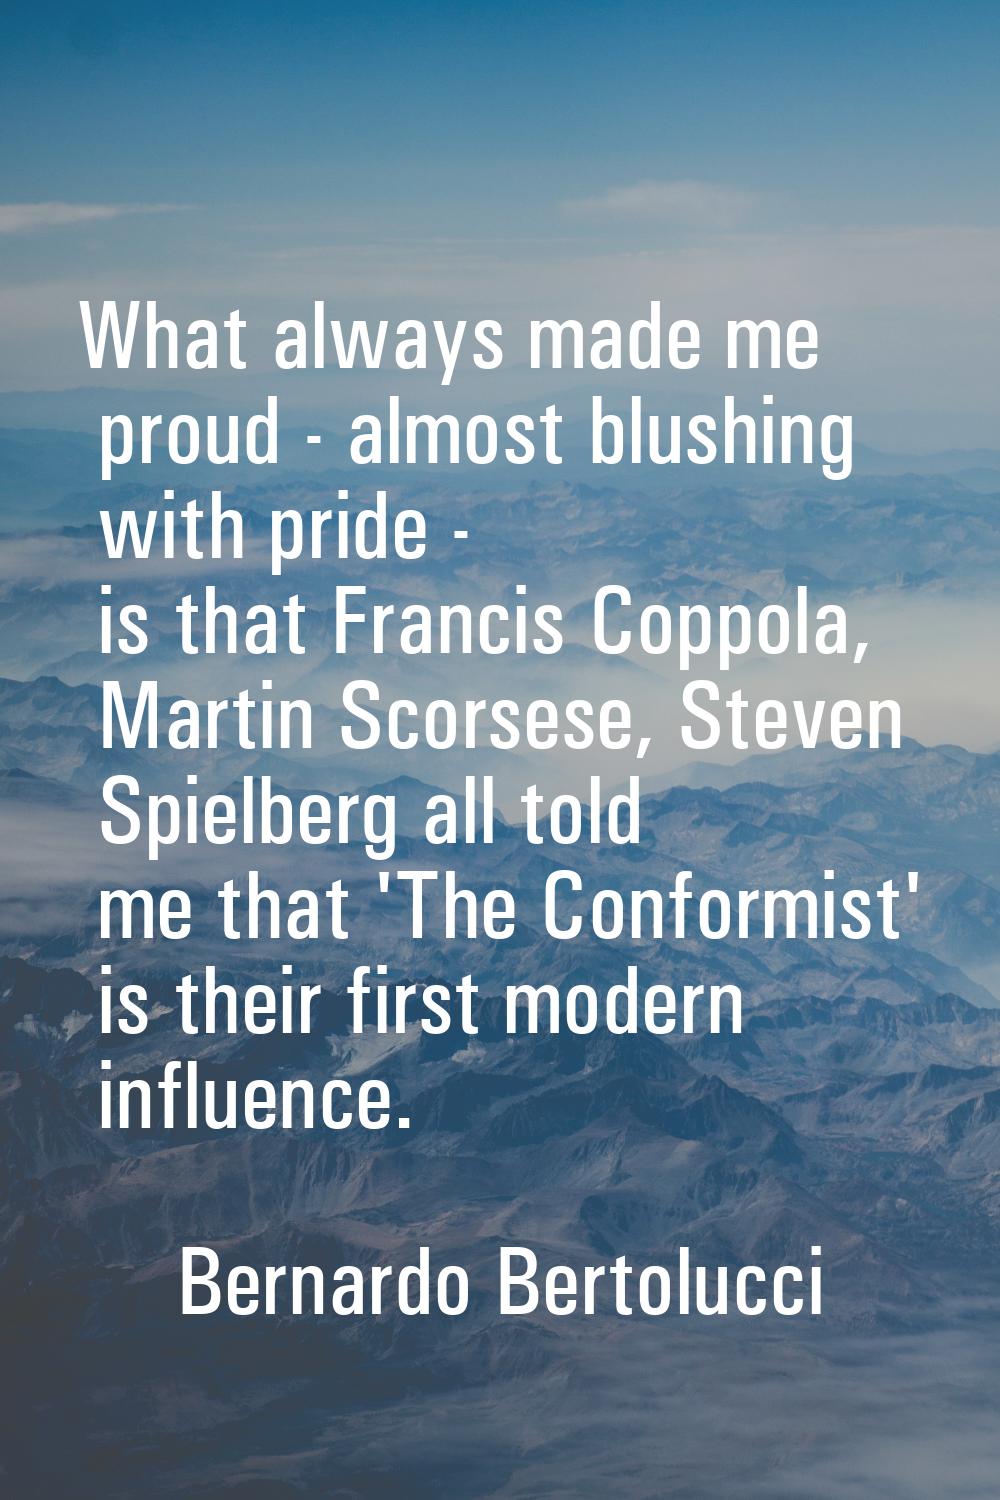 What always made me proud - almost blushing with pride - is that Francis Coppola, Martin Scorsese, 